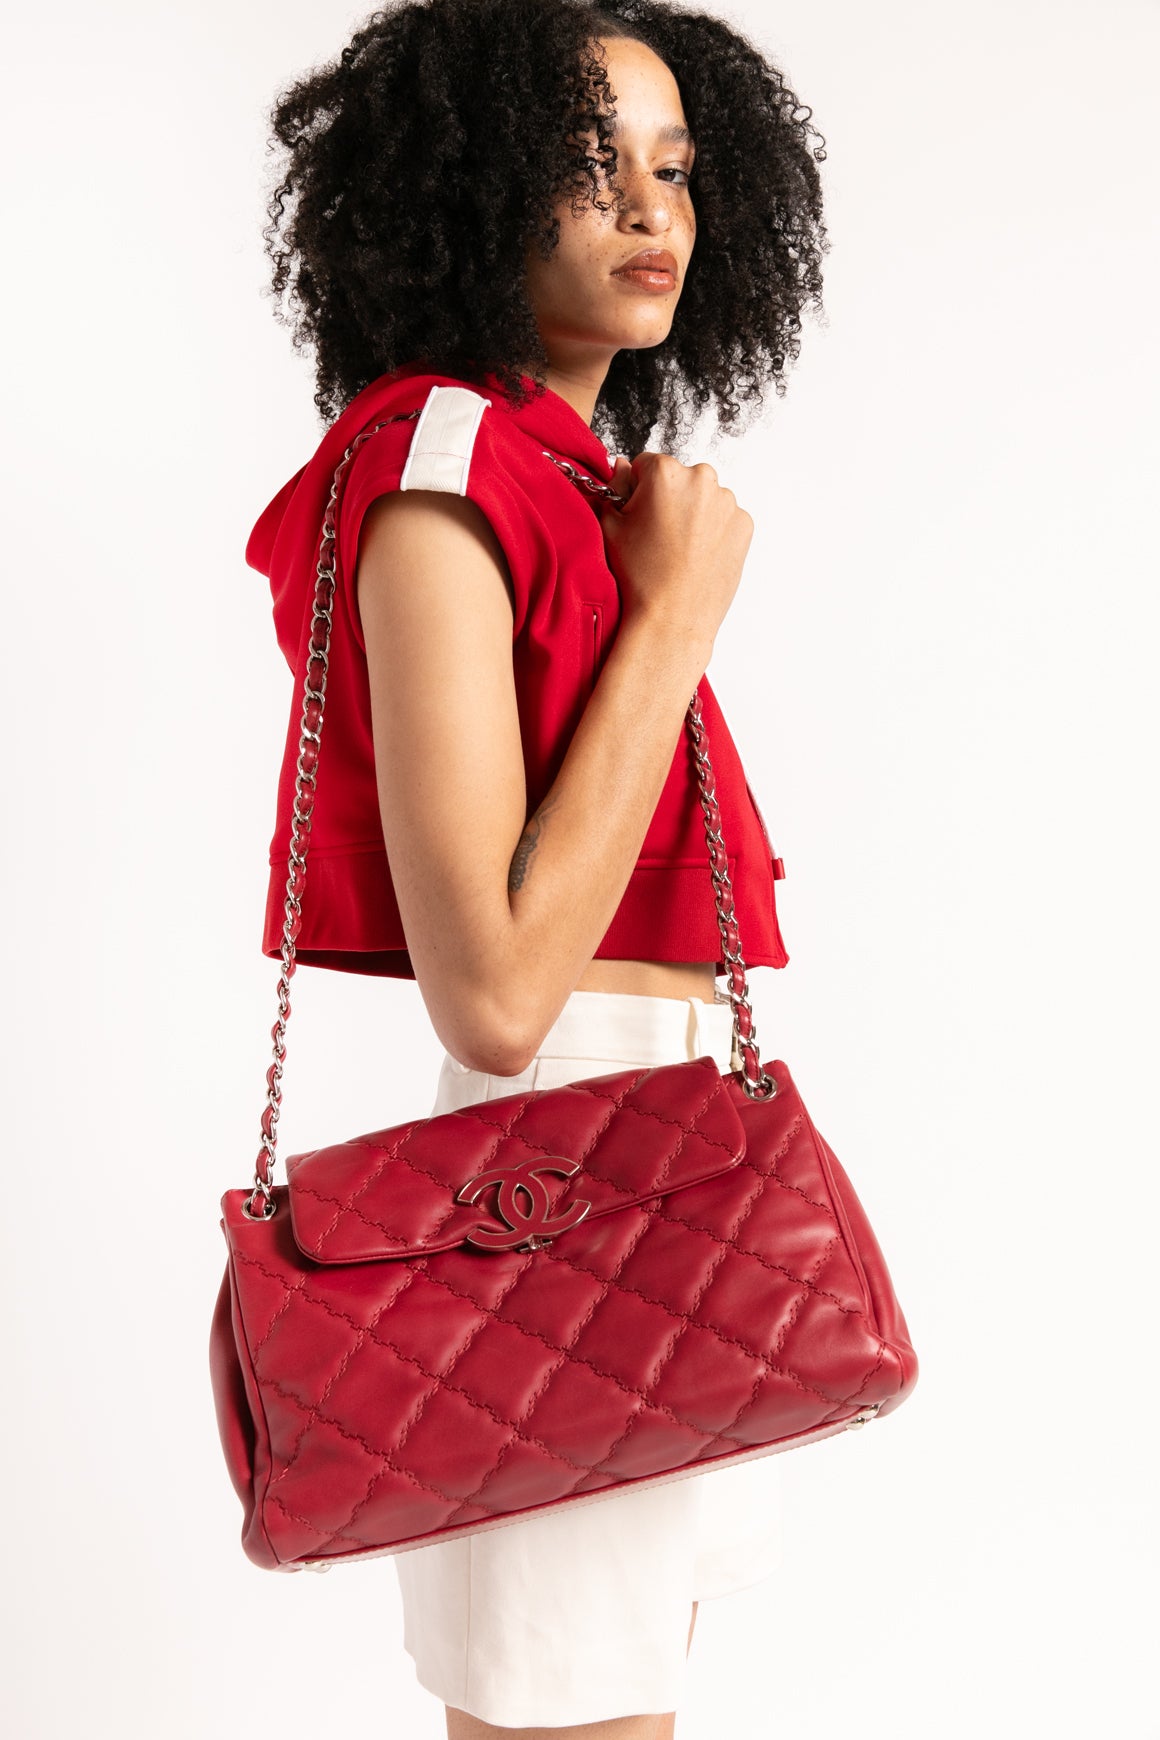 CHANEL Red Quilted Hamptons Bag